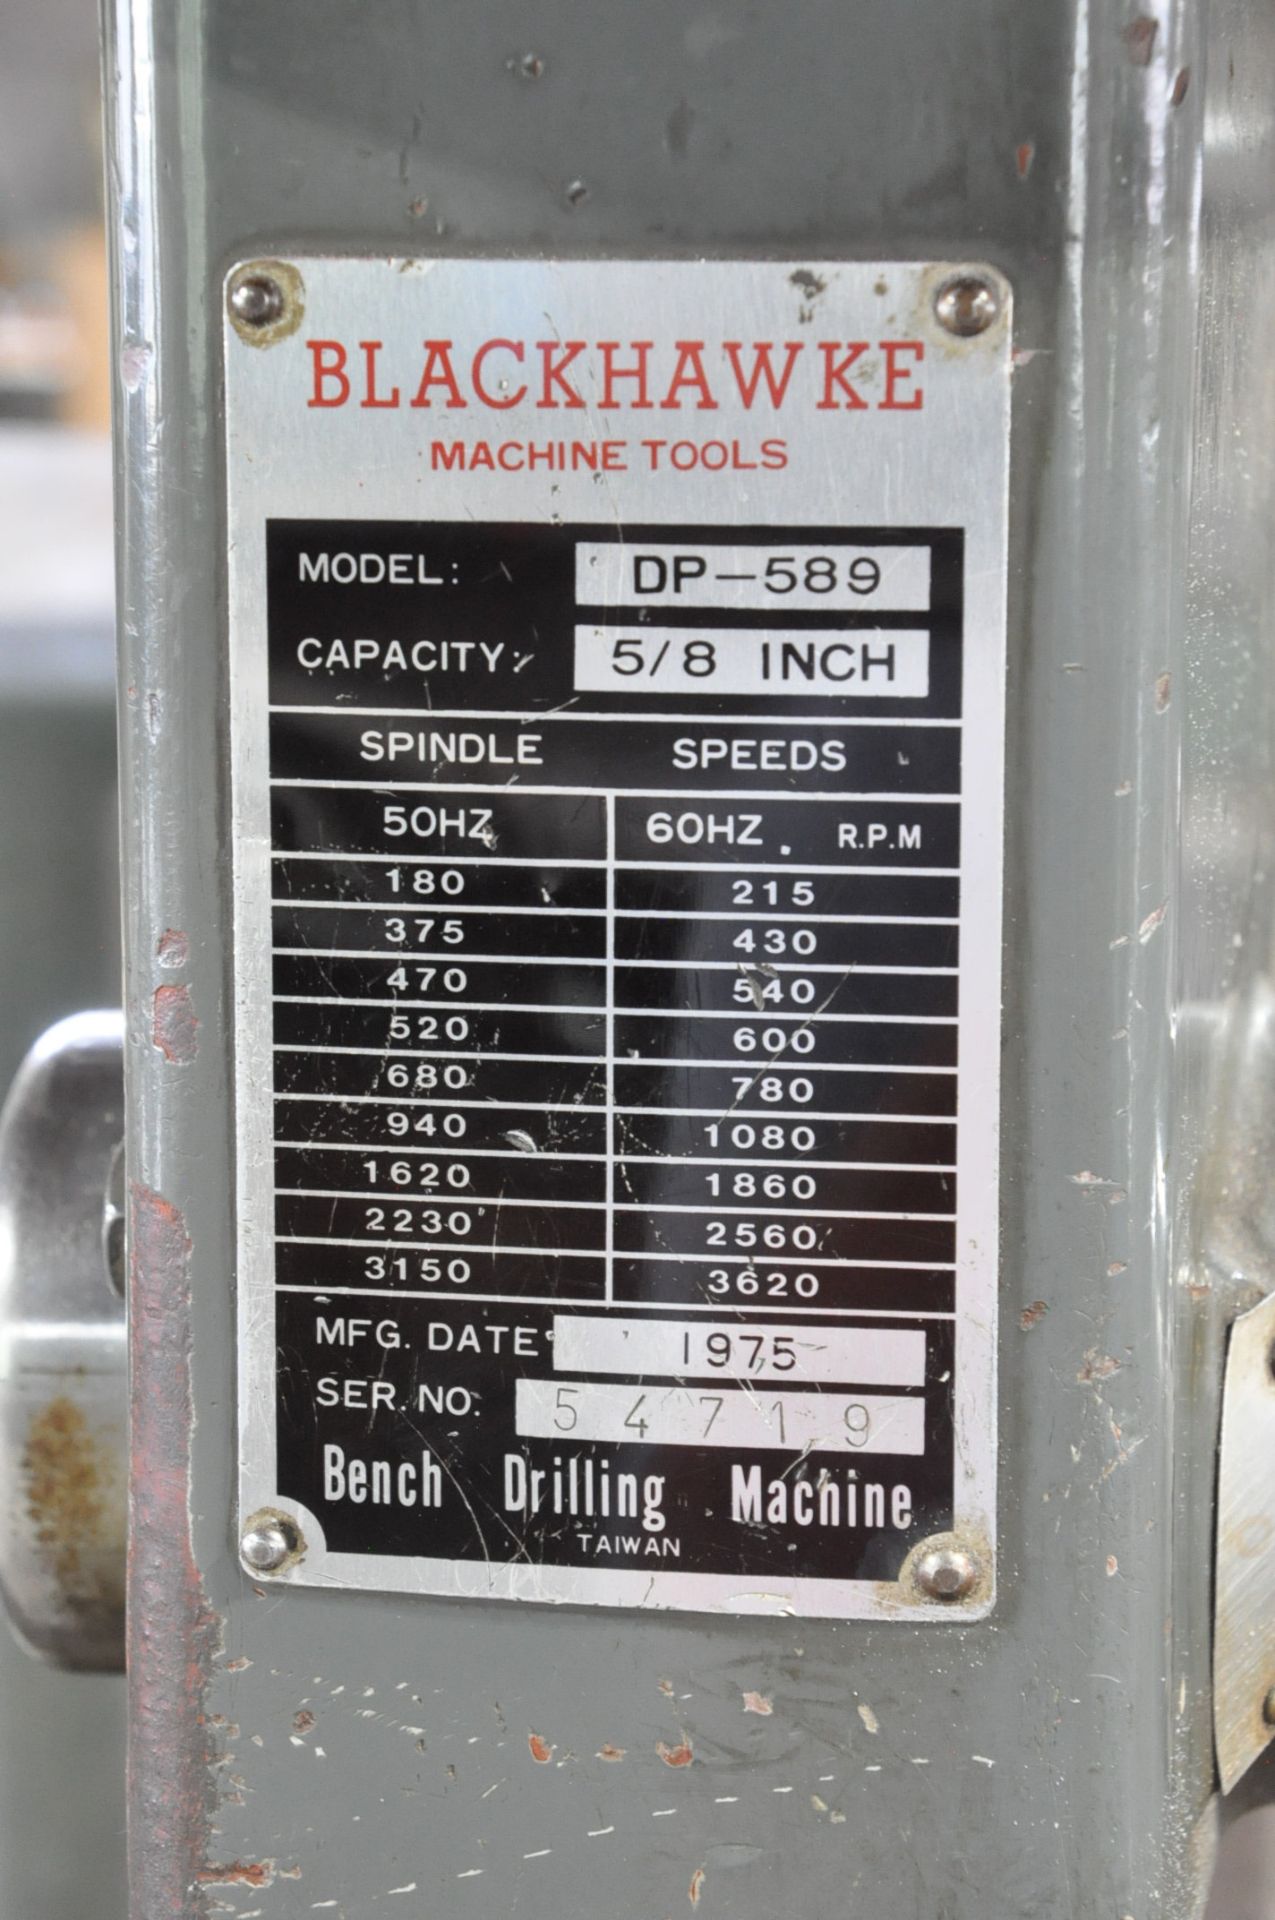 Blackhawke Model DP-588, 17" Variable Speed Bench Top Drill Press - Image 5 of 5